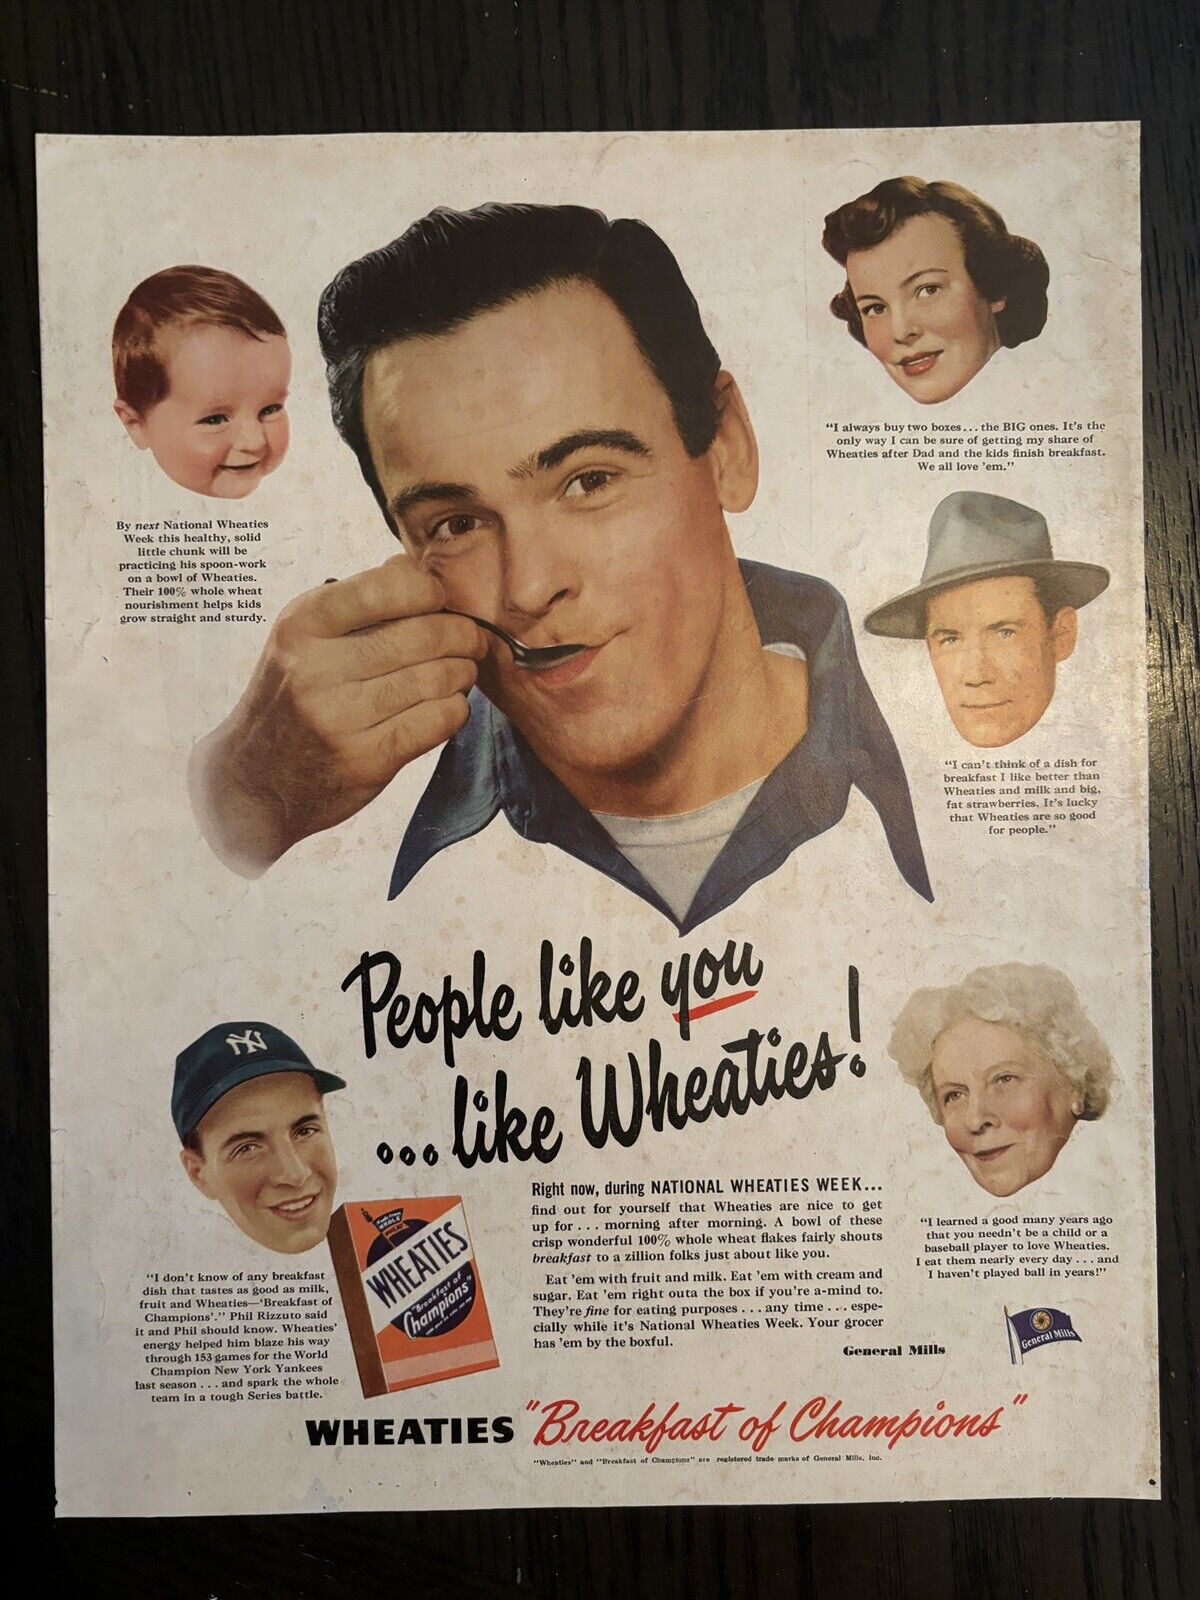 Wheaties Cereal Phil Rizutto NY Yankees Breakfast Champions Vtg Print Ad 1950?